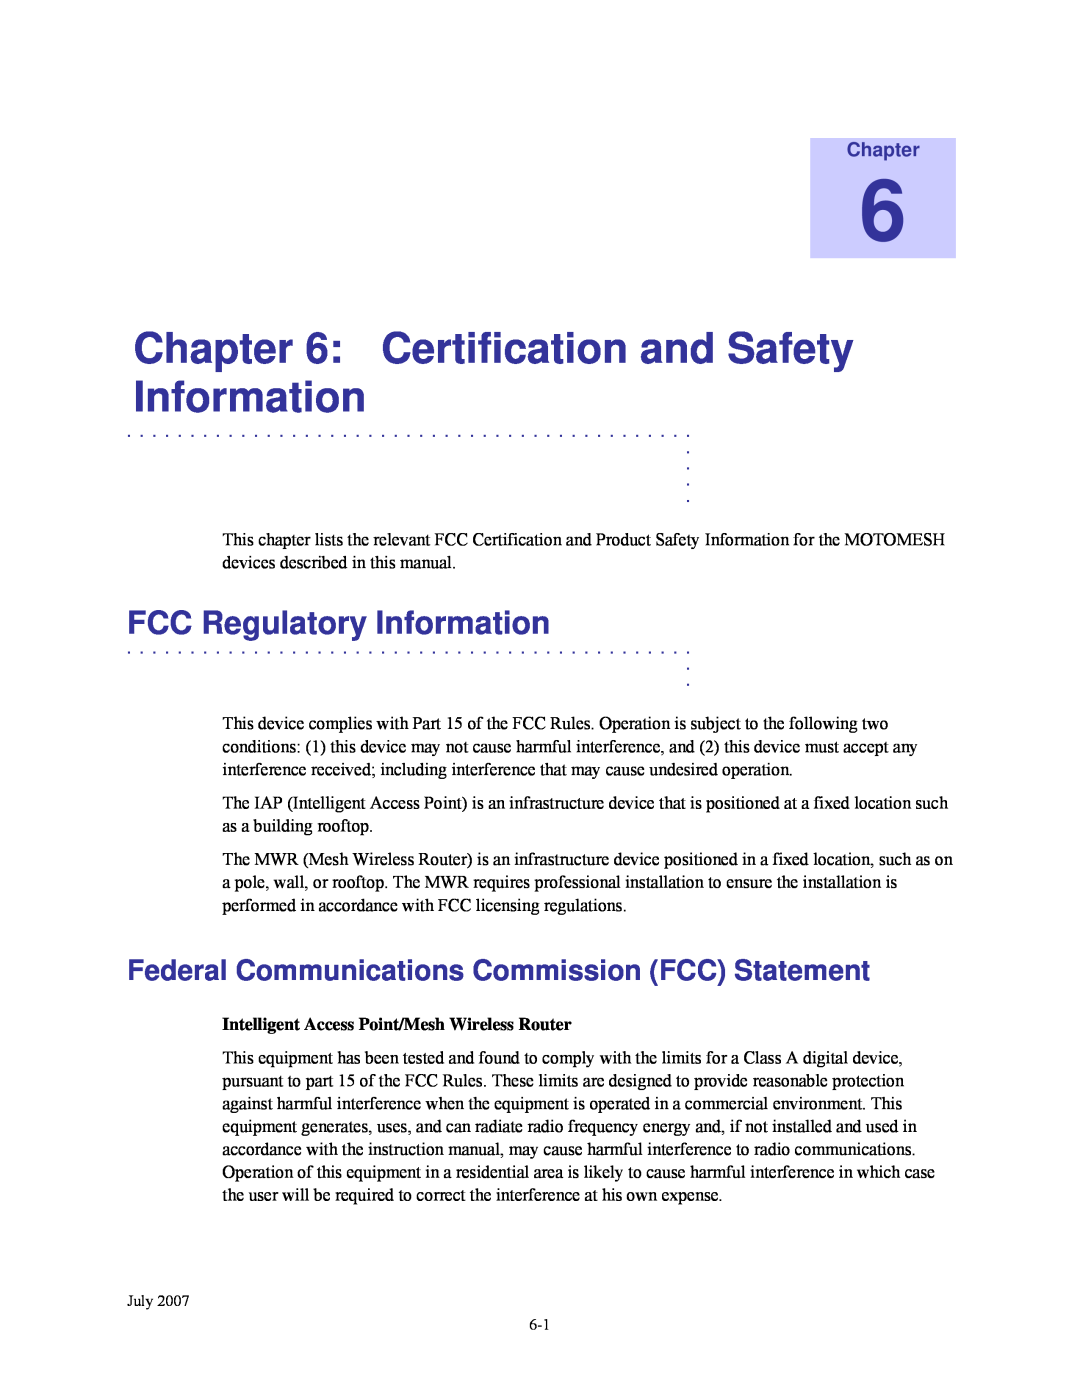 Nikon 4300 manual Certification and Safety Information, FCC Regulatory Information, Chapter 